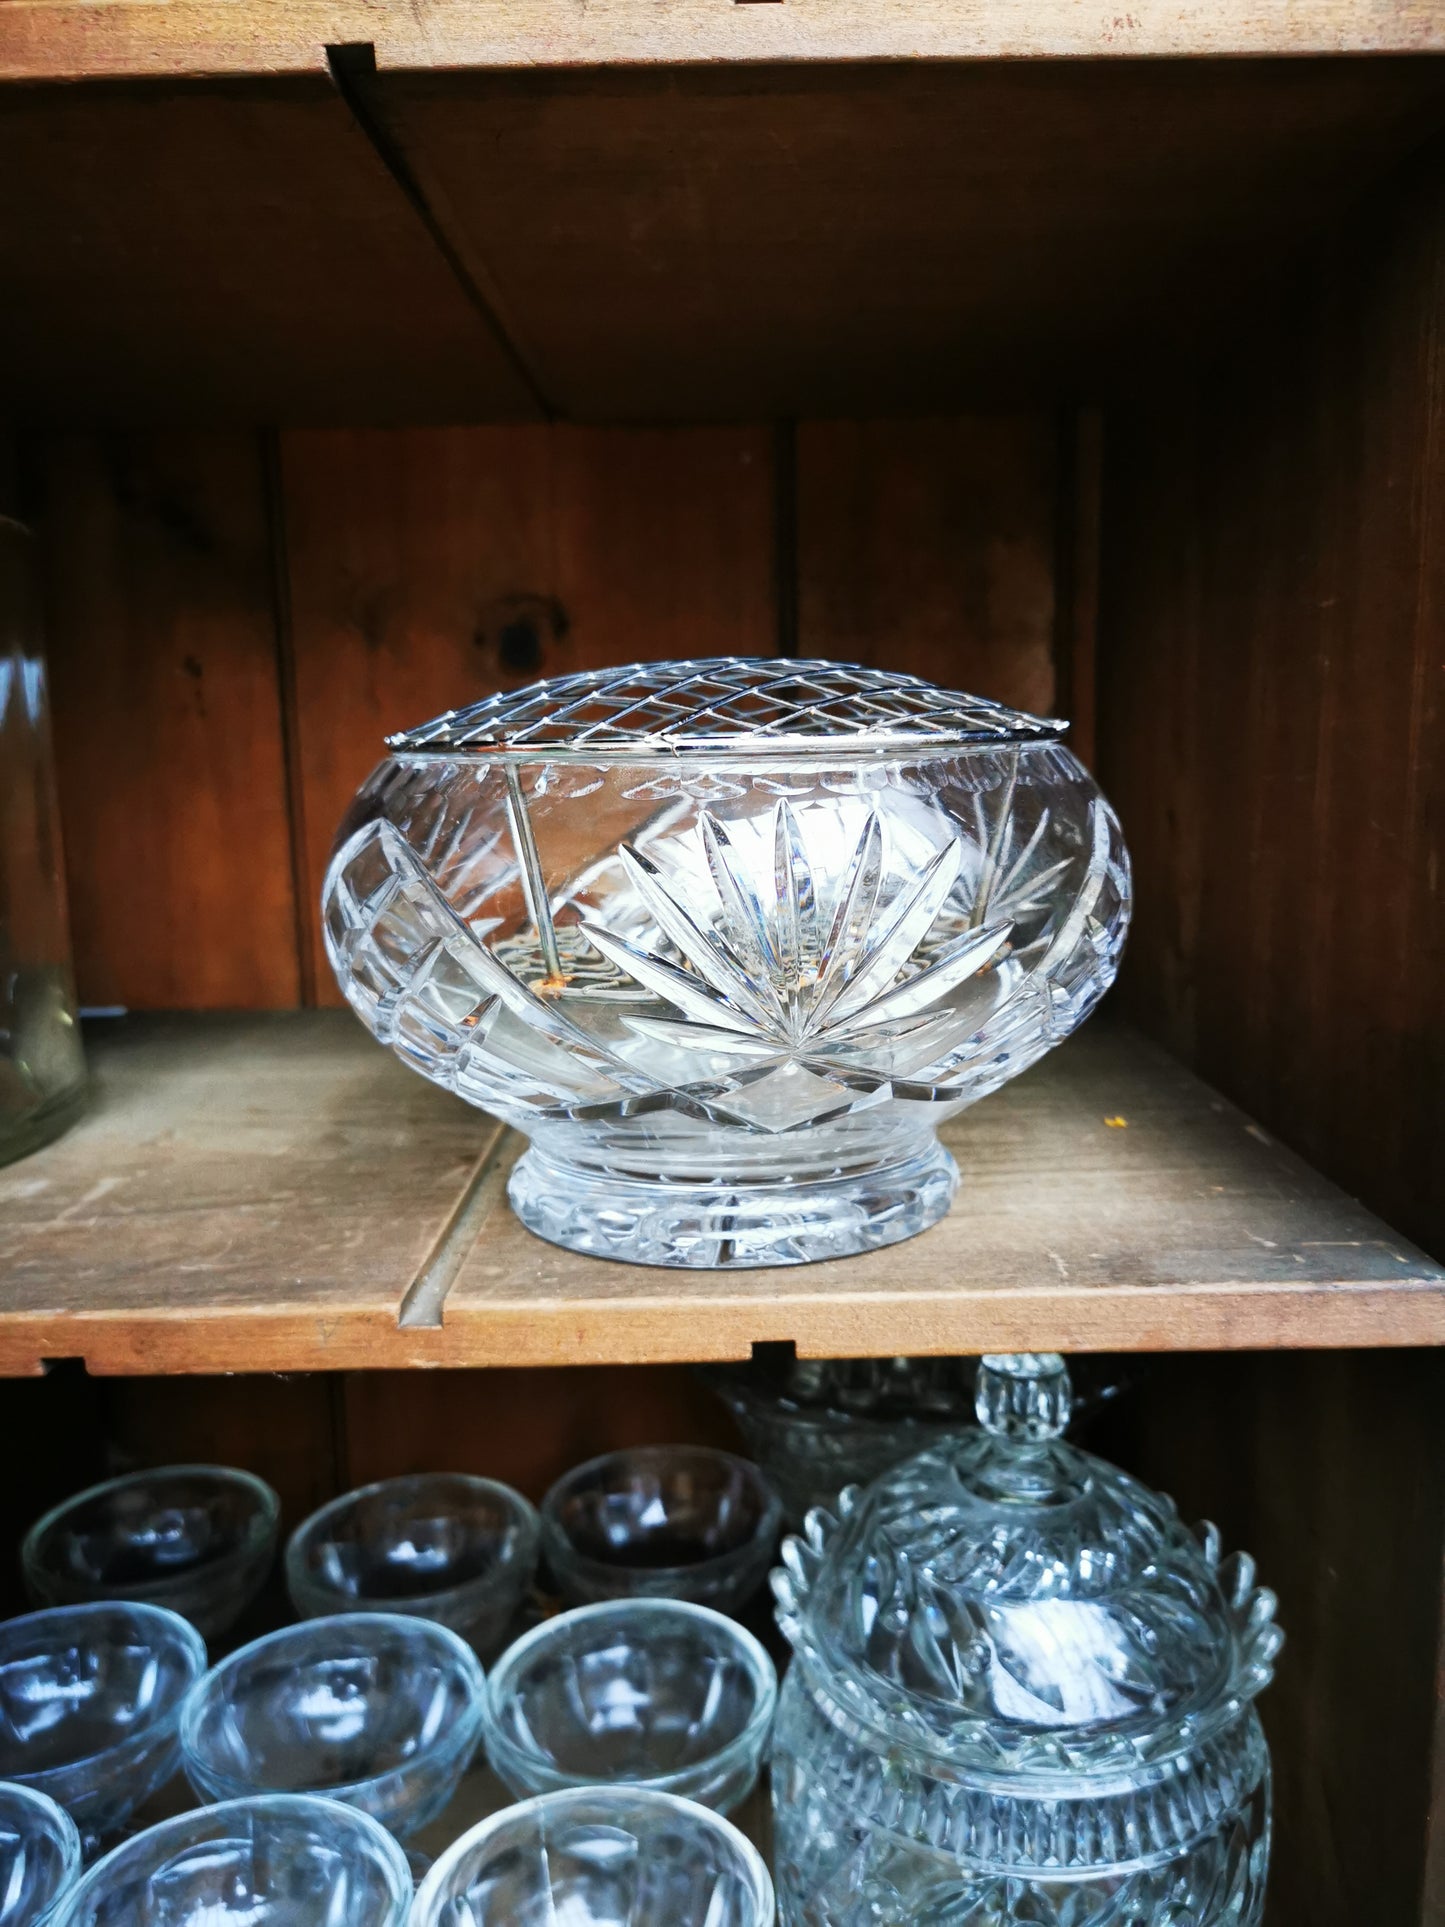 Large Lead Crystal Glass Rose Bowl 6.75-inch diameter